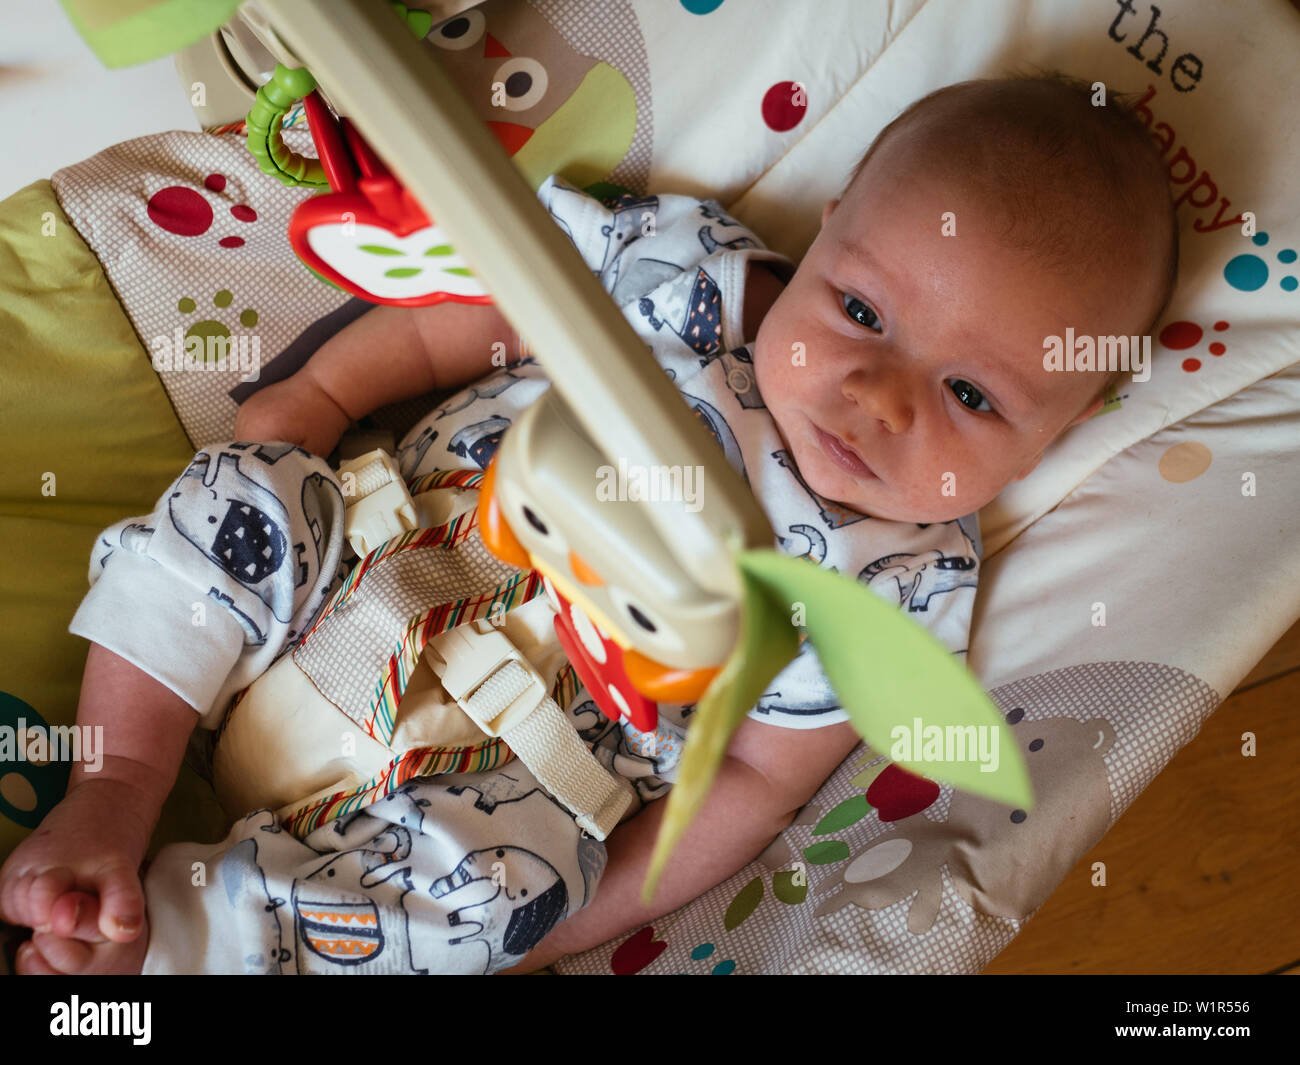 Baby in Toy Bouncer Stock Photo